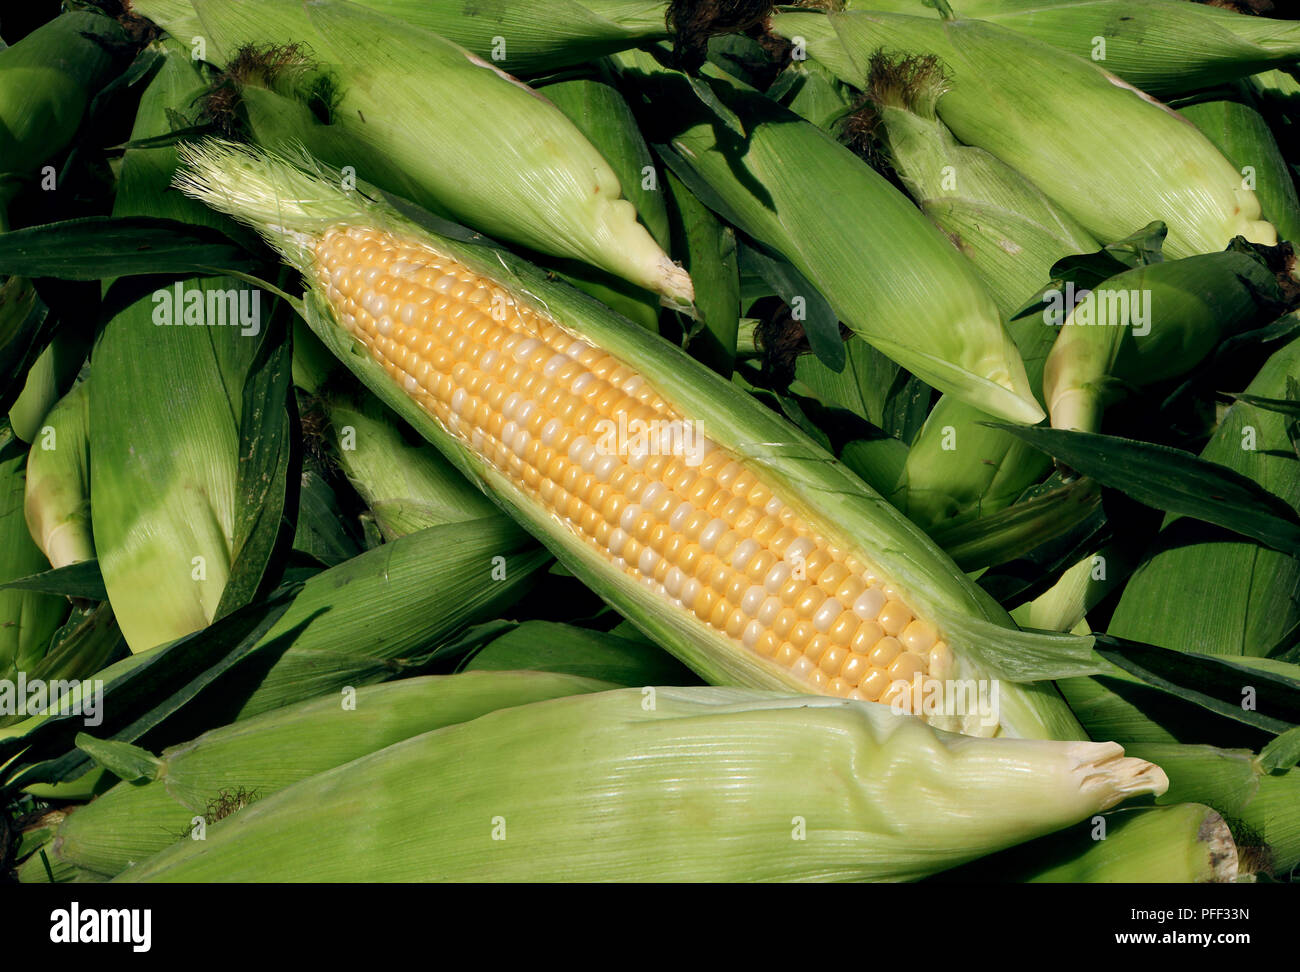 Corn harvest agriculture and fresh farm produce as a heap of yellow grain vegetable as agricultural and food farming. Stock Photo